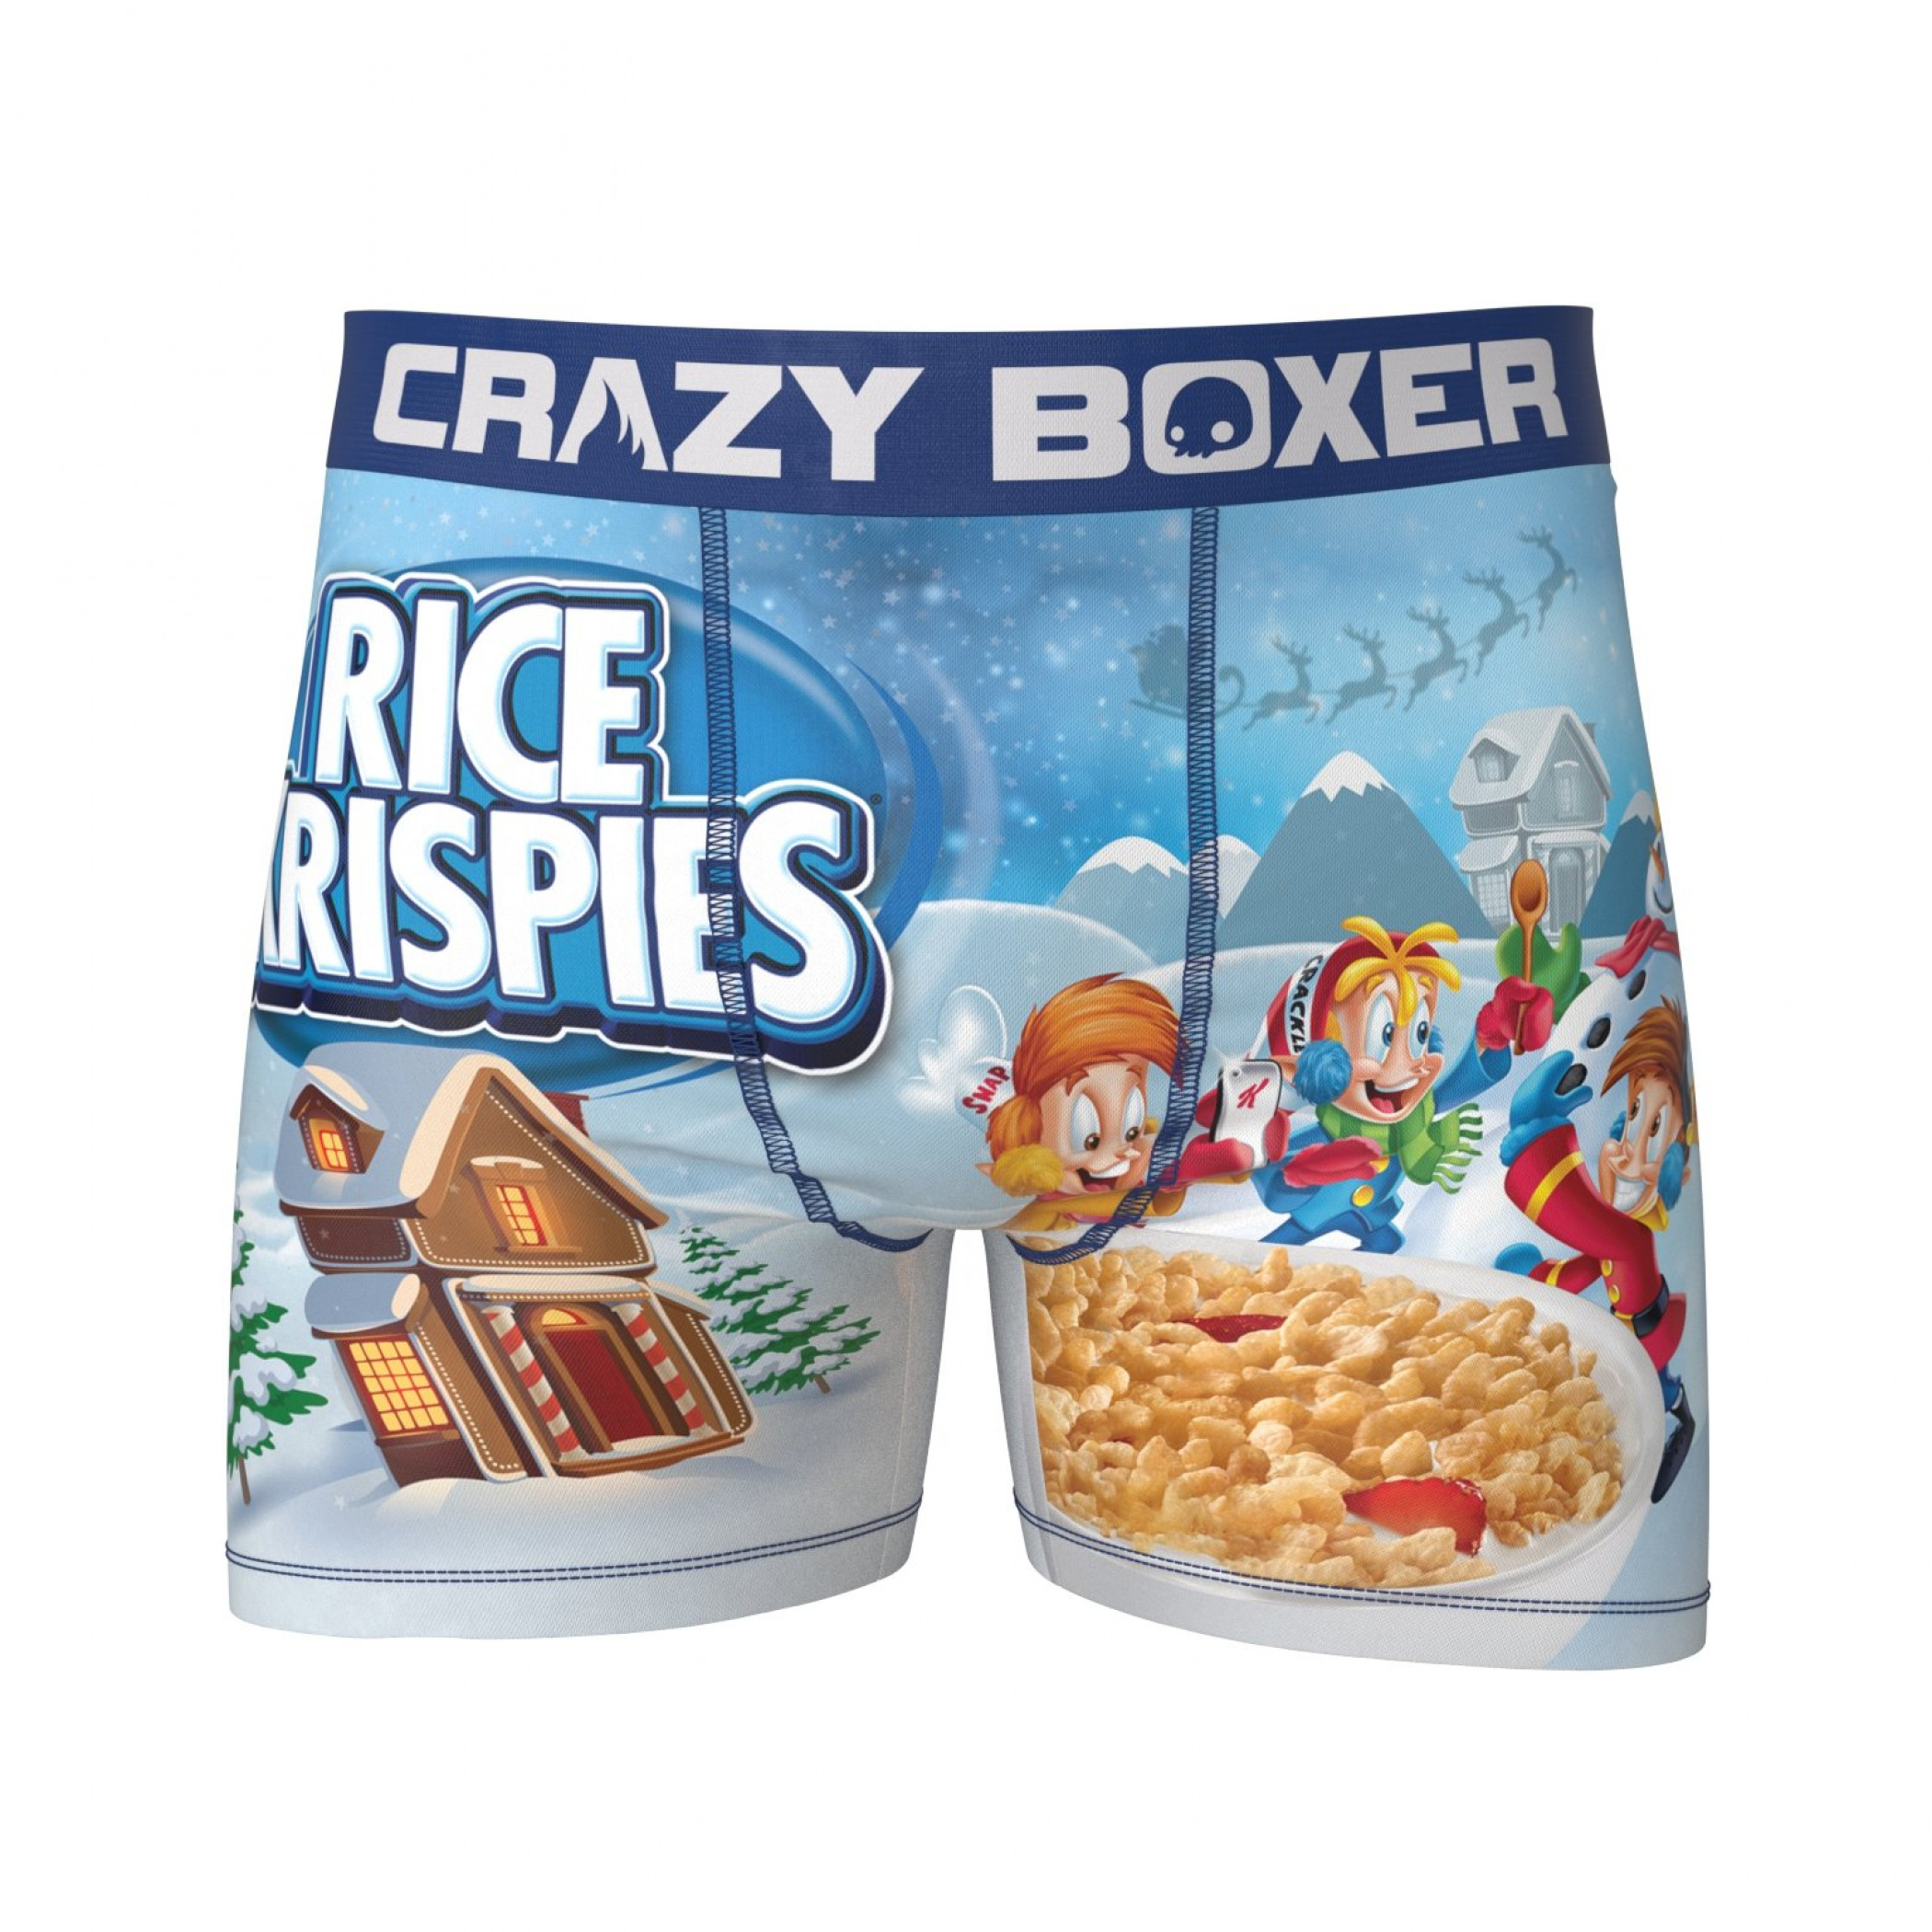 Kellogg's Corn Flakes Cereal Box Style Swag Boxer Briefs-XLarge (40-42)